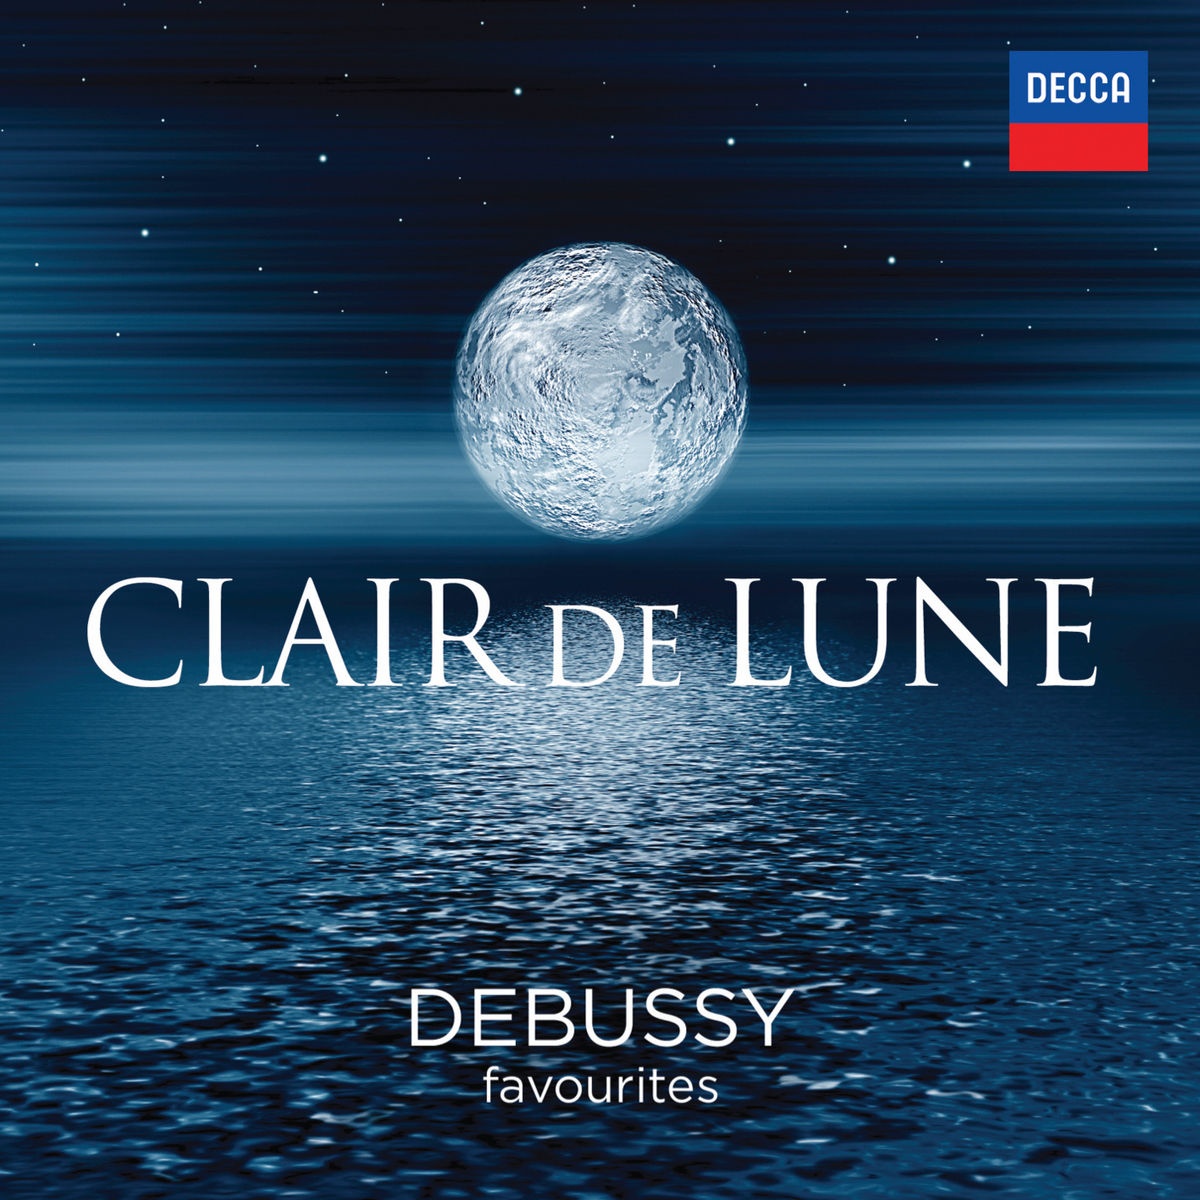 Debussy: Danses for Harp and Orchestra  1. Danse sacre e